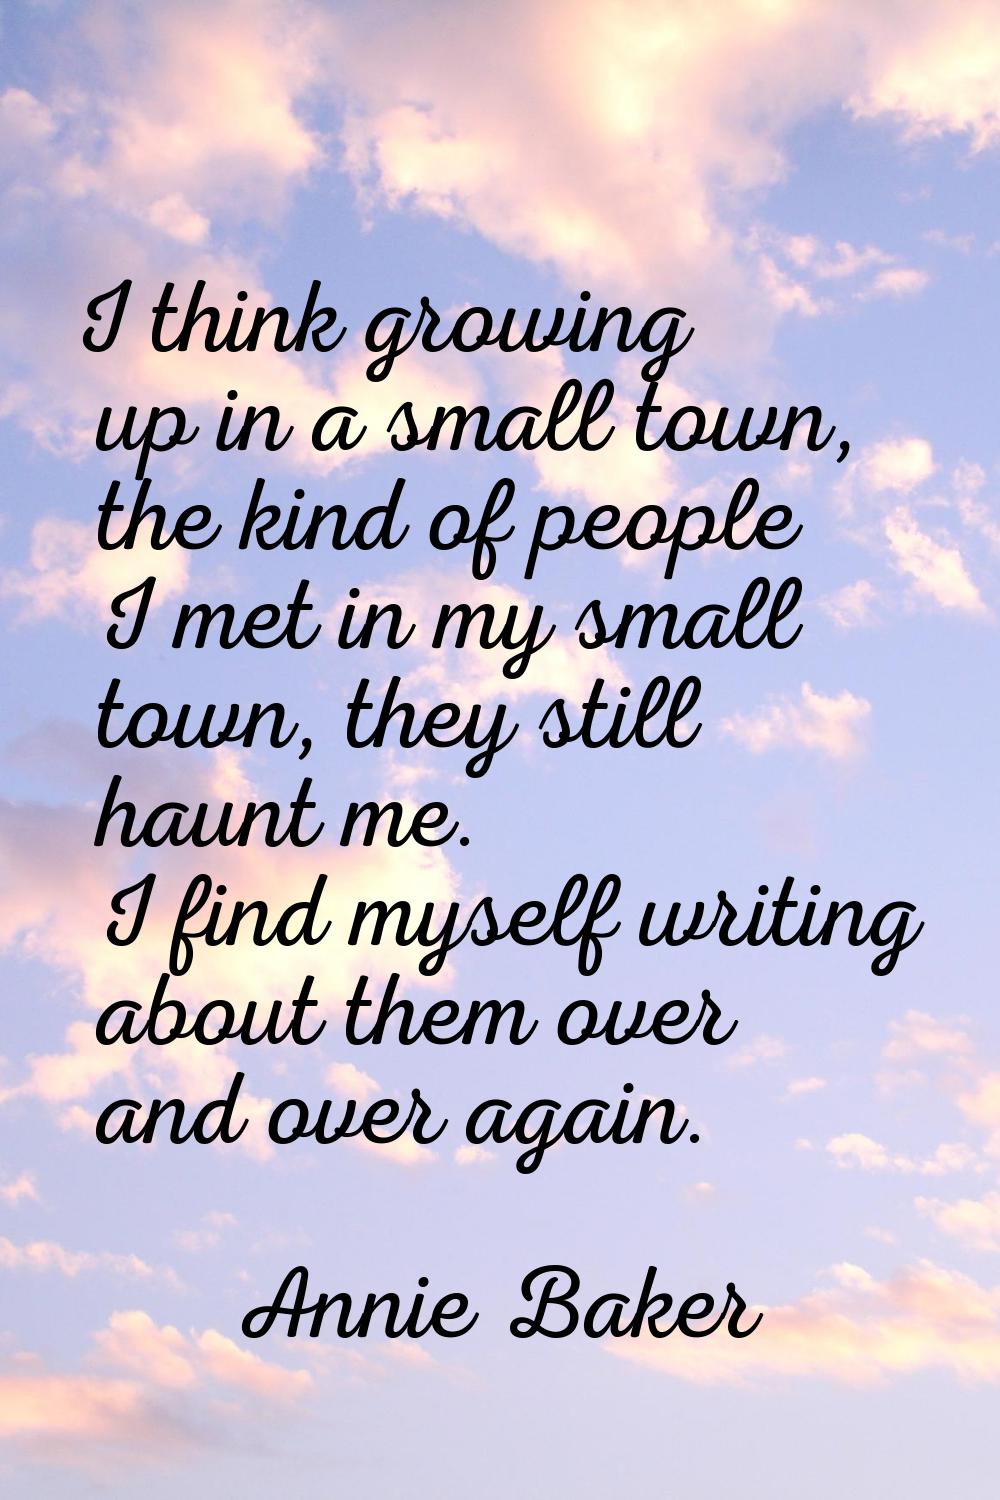 I think growing up in a small town, the kind of people I met in my small town, they still haunt me.